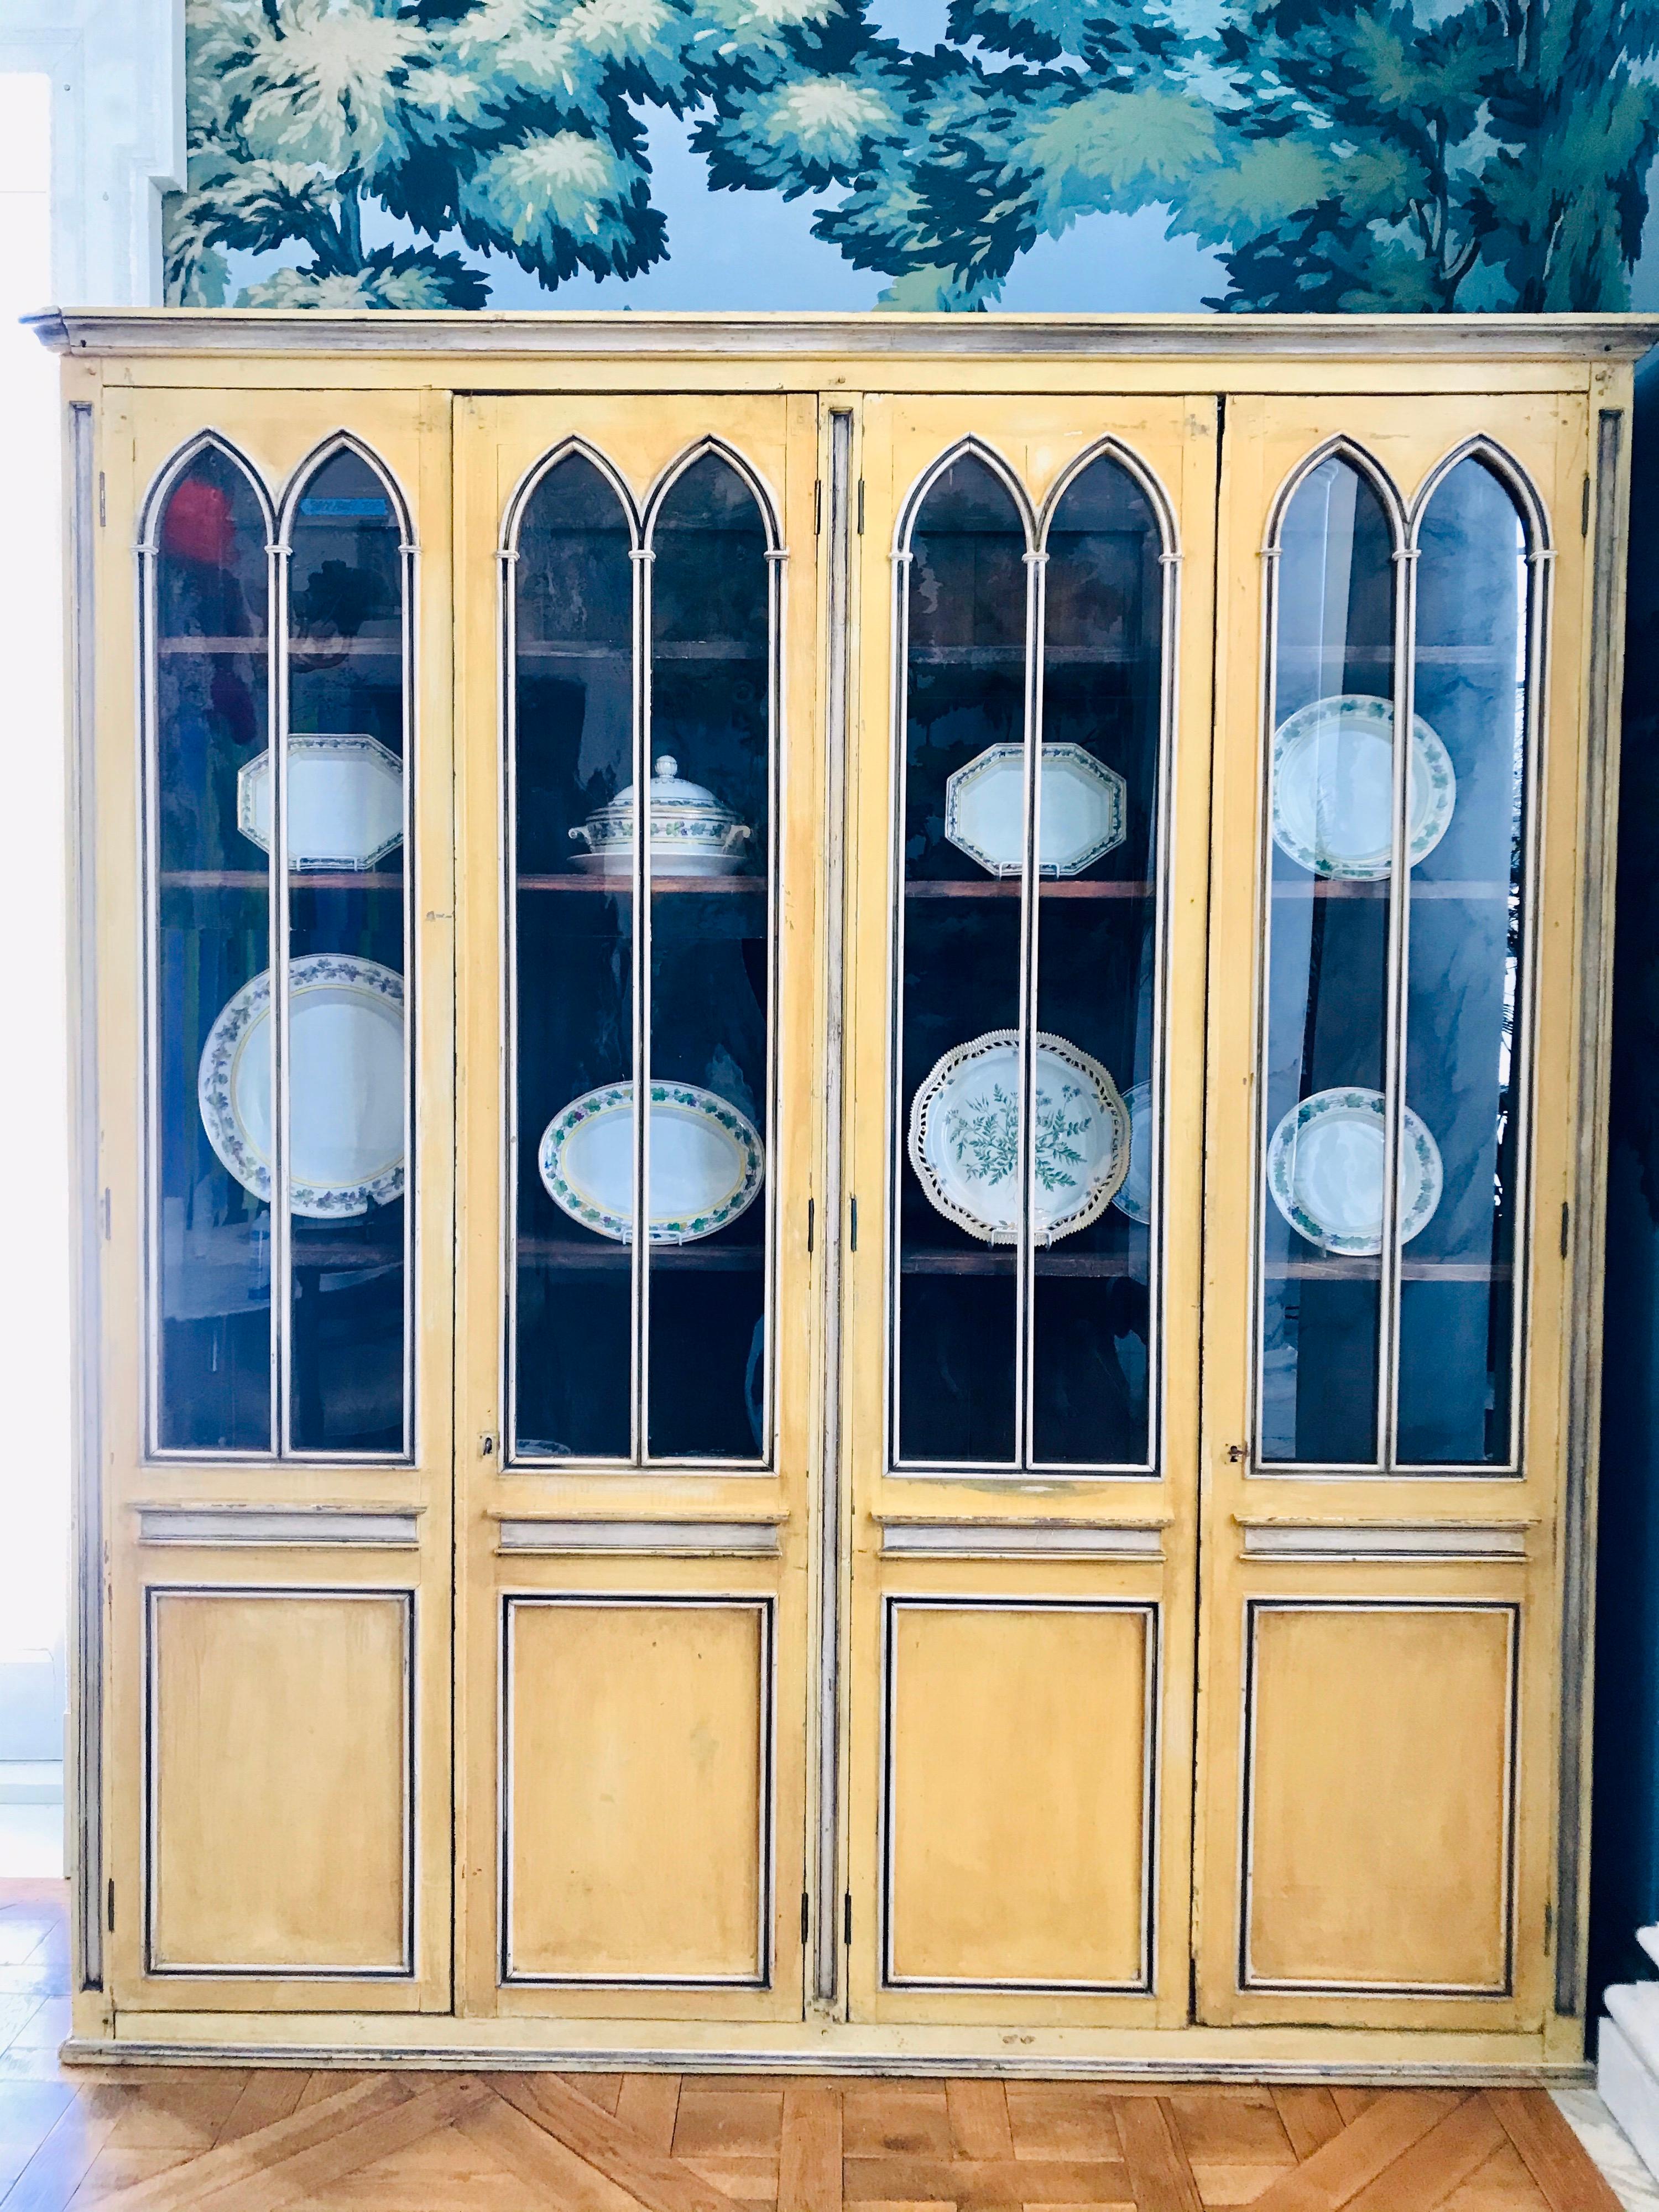 Beautiful Neo-Gothic style French Country four door bookcase, hand painted in yellow and grey tones with accents of deep blue.
It was manufactured in the 1980s using old materials and looks convincingly to be from 1840.